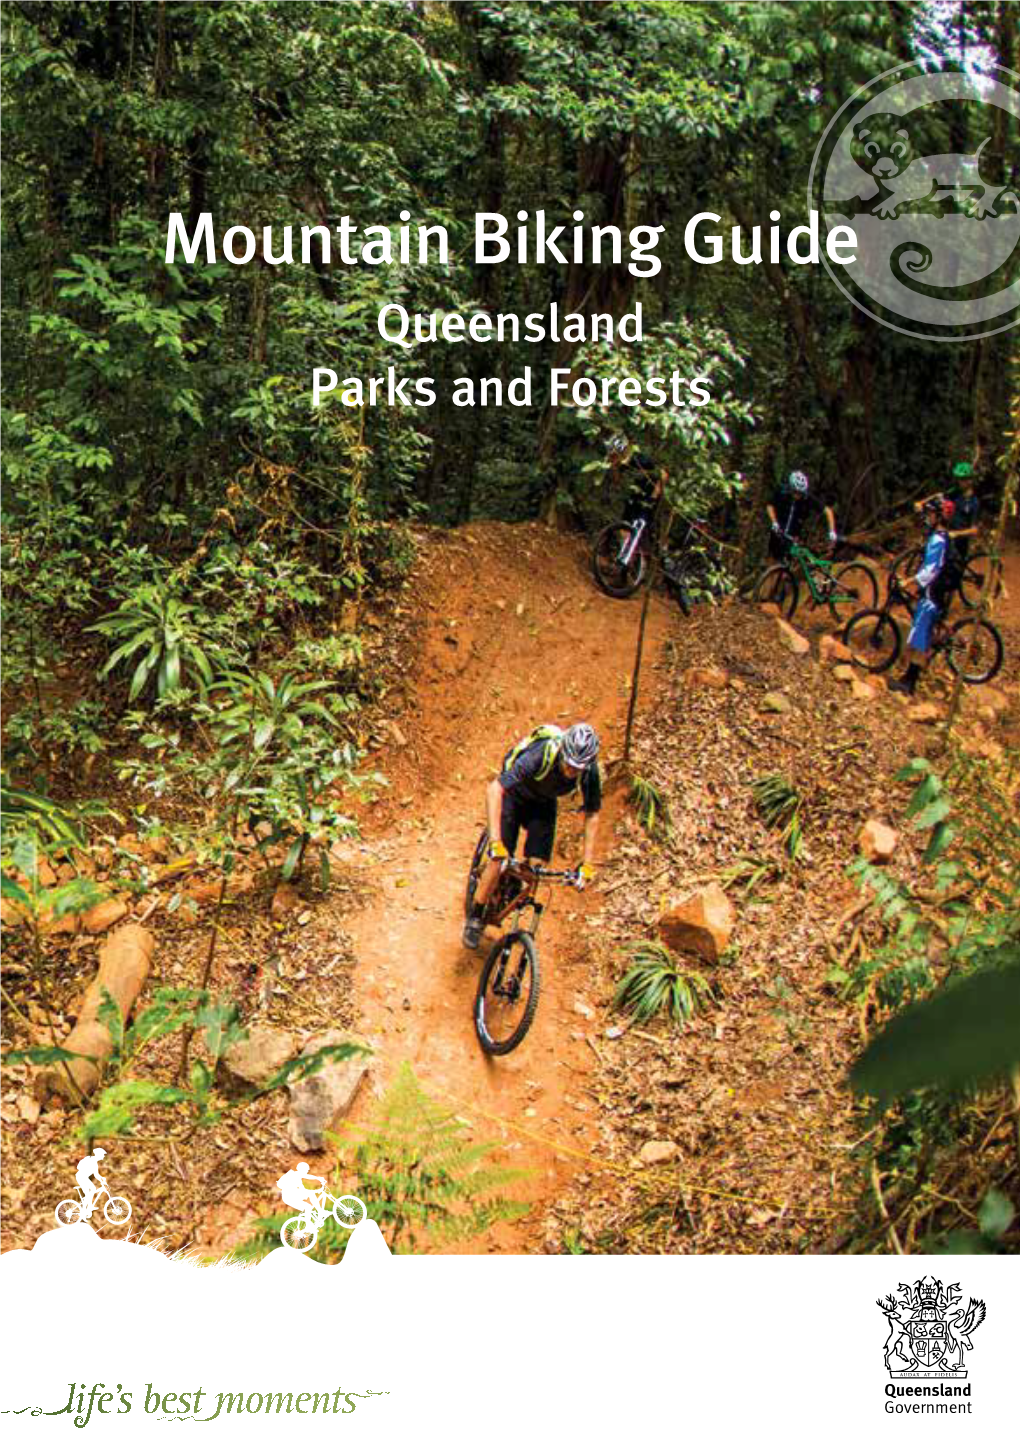 Mountain Biking Guide Queensland Parks and Forests Contents Holiday with Your Bikes